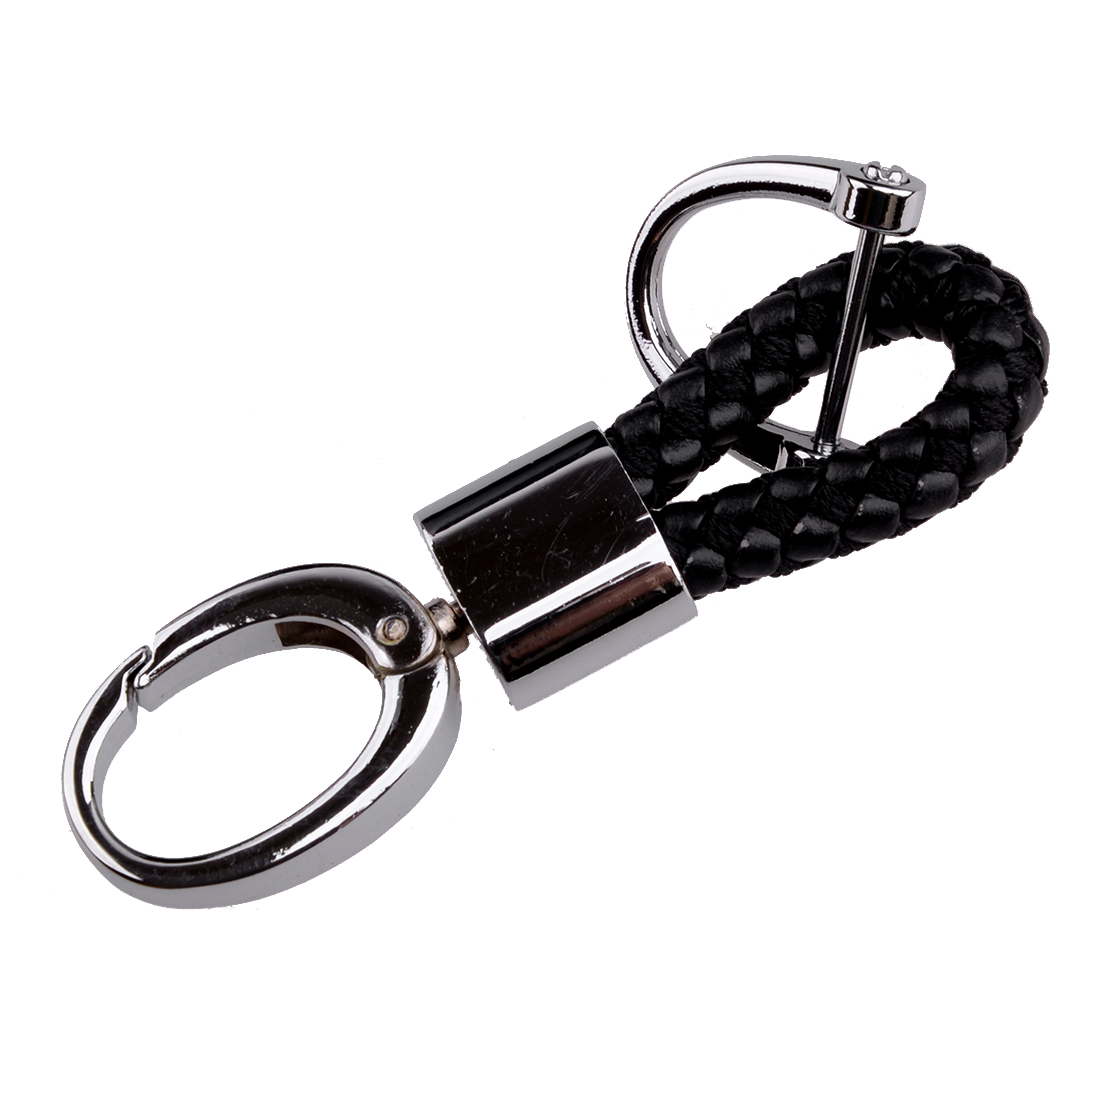 Details about   Car Keychain Key Chain Key Ring Key Fob Leather Rope Strap Weave Car Accessories 